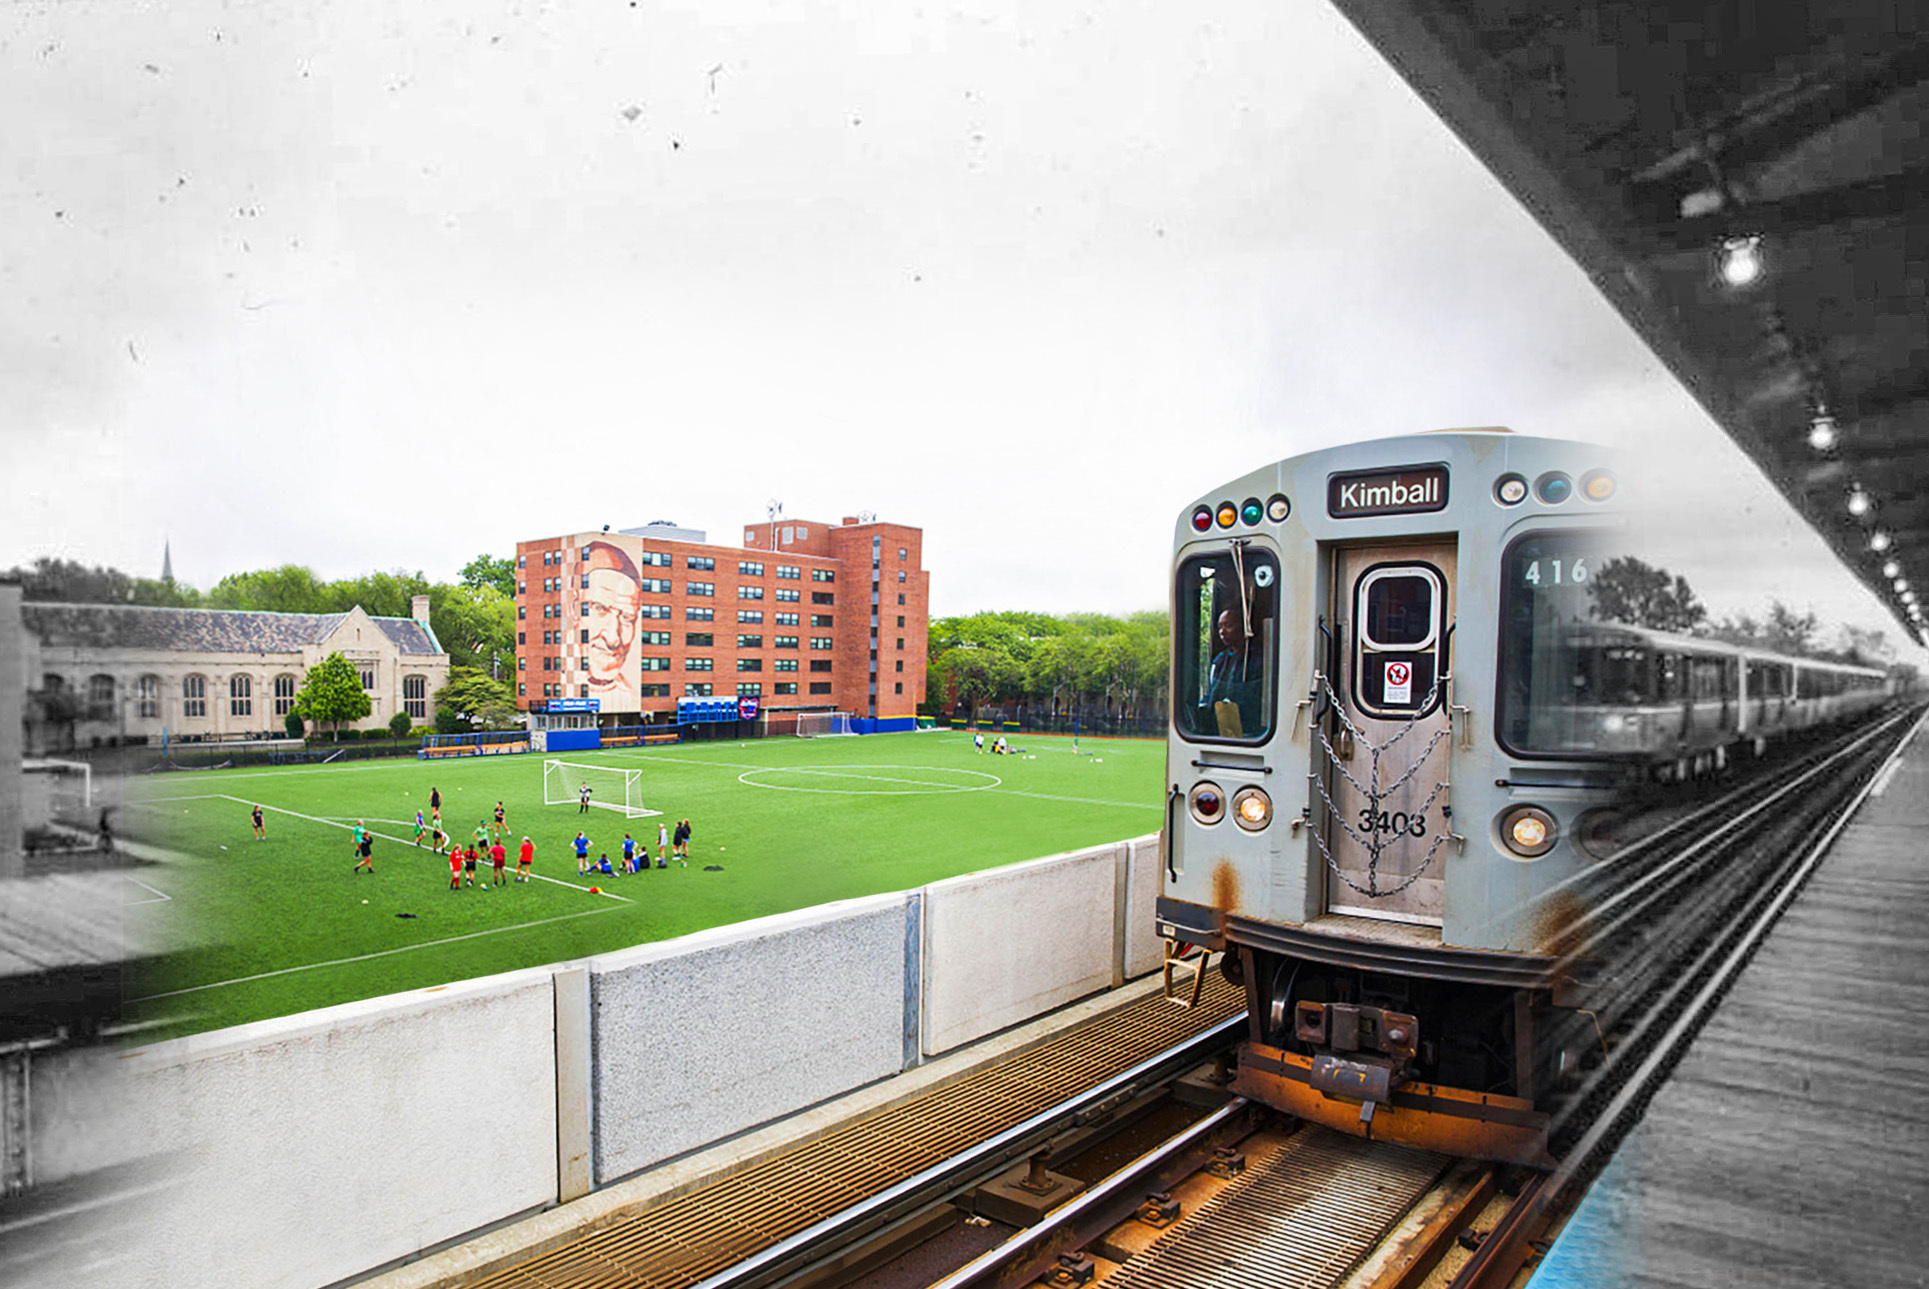 The Fullerton CTA Station is shown in 2022. A train is approaching the station with a brown sign on the top that reads “Kimball.” Behind the station is Wish field: a green soccer field with people in different colored shirts, a soccer goal, and soccer balls.